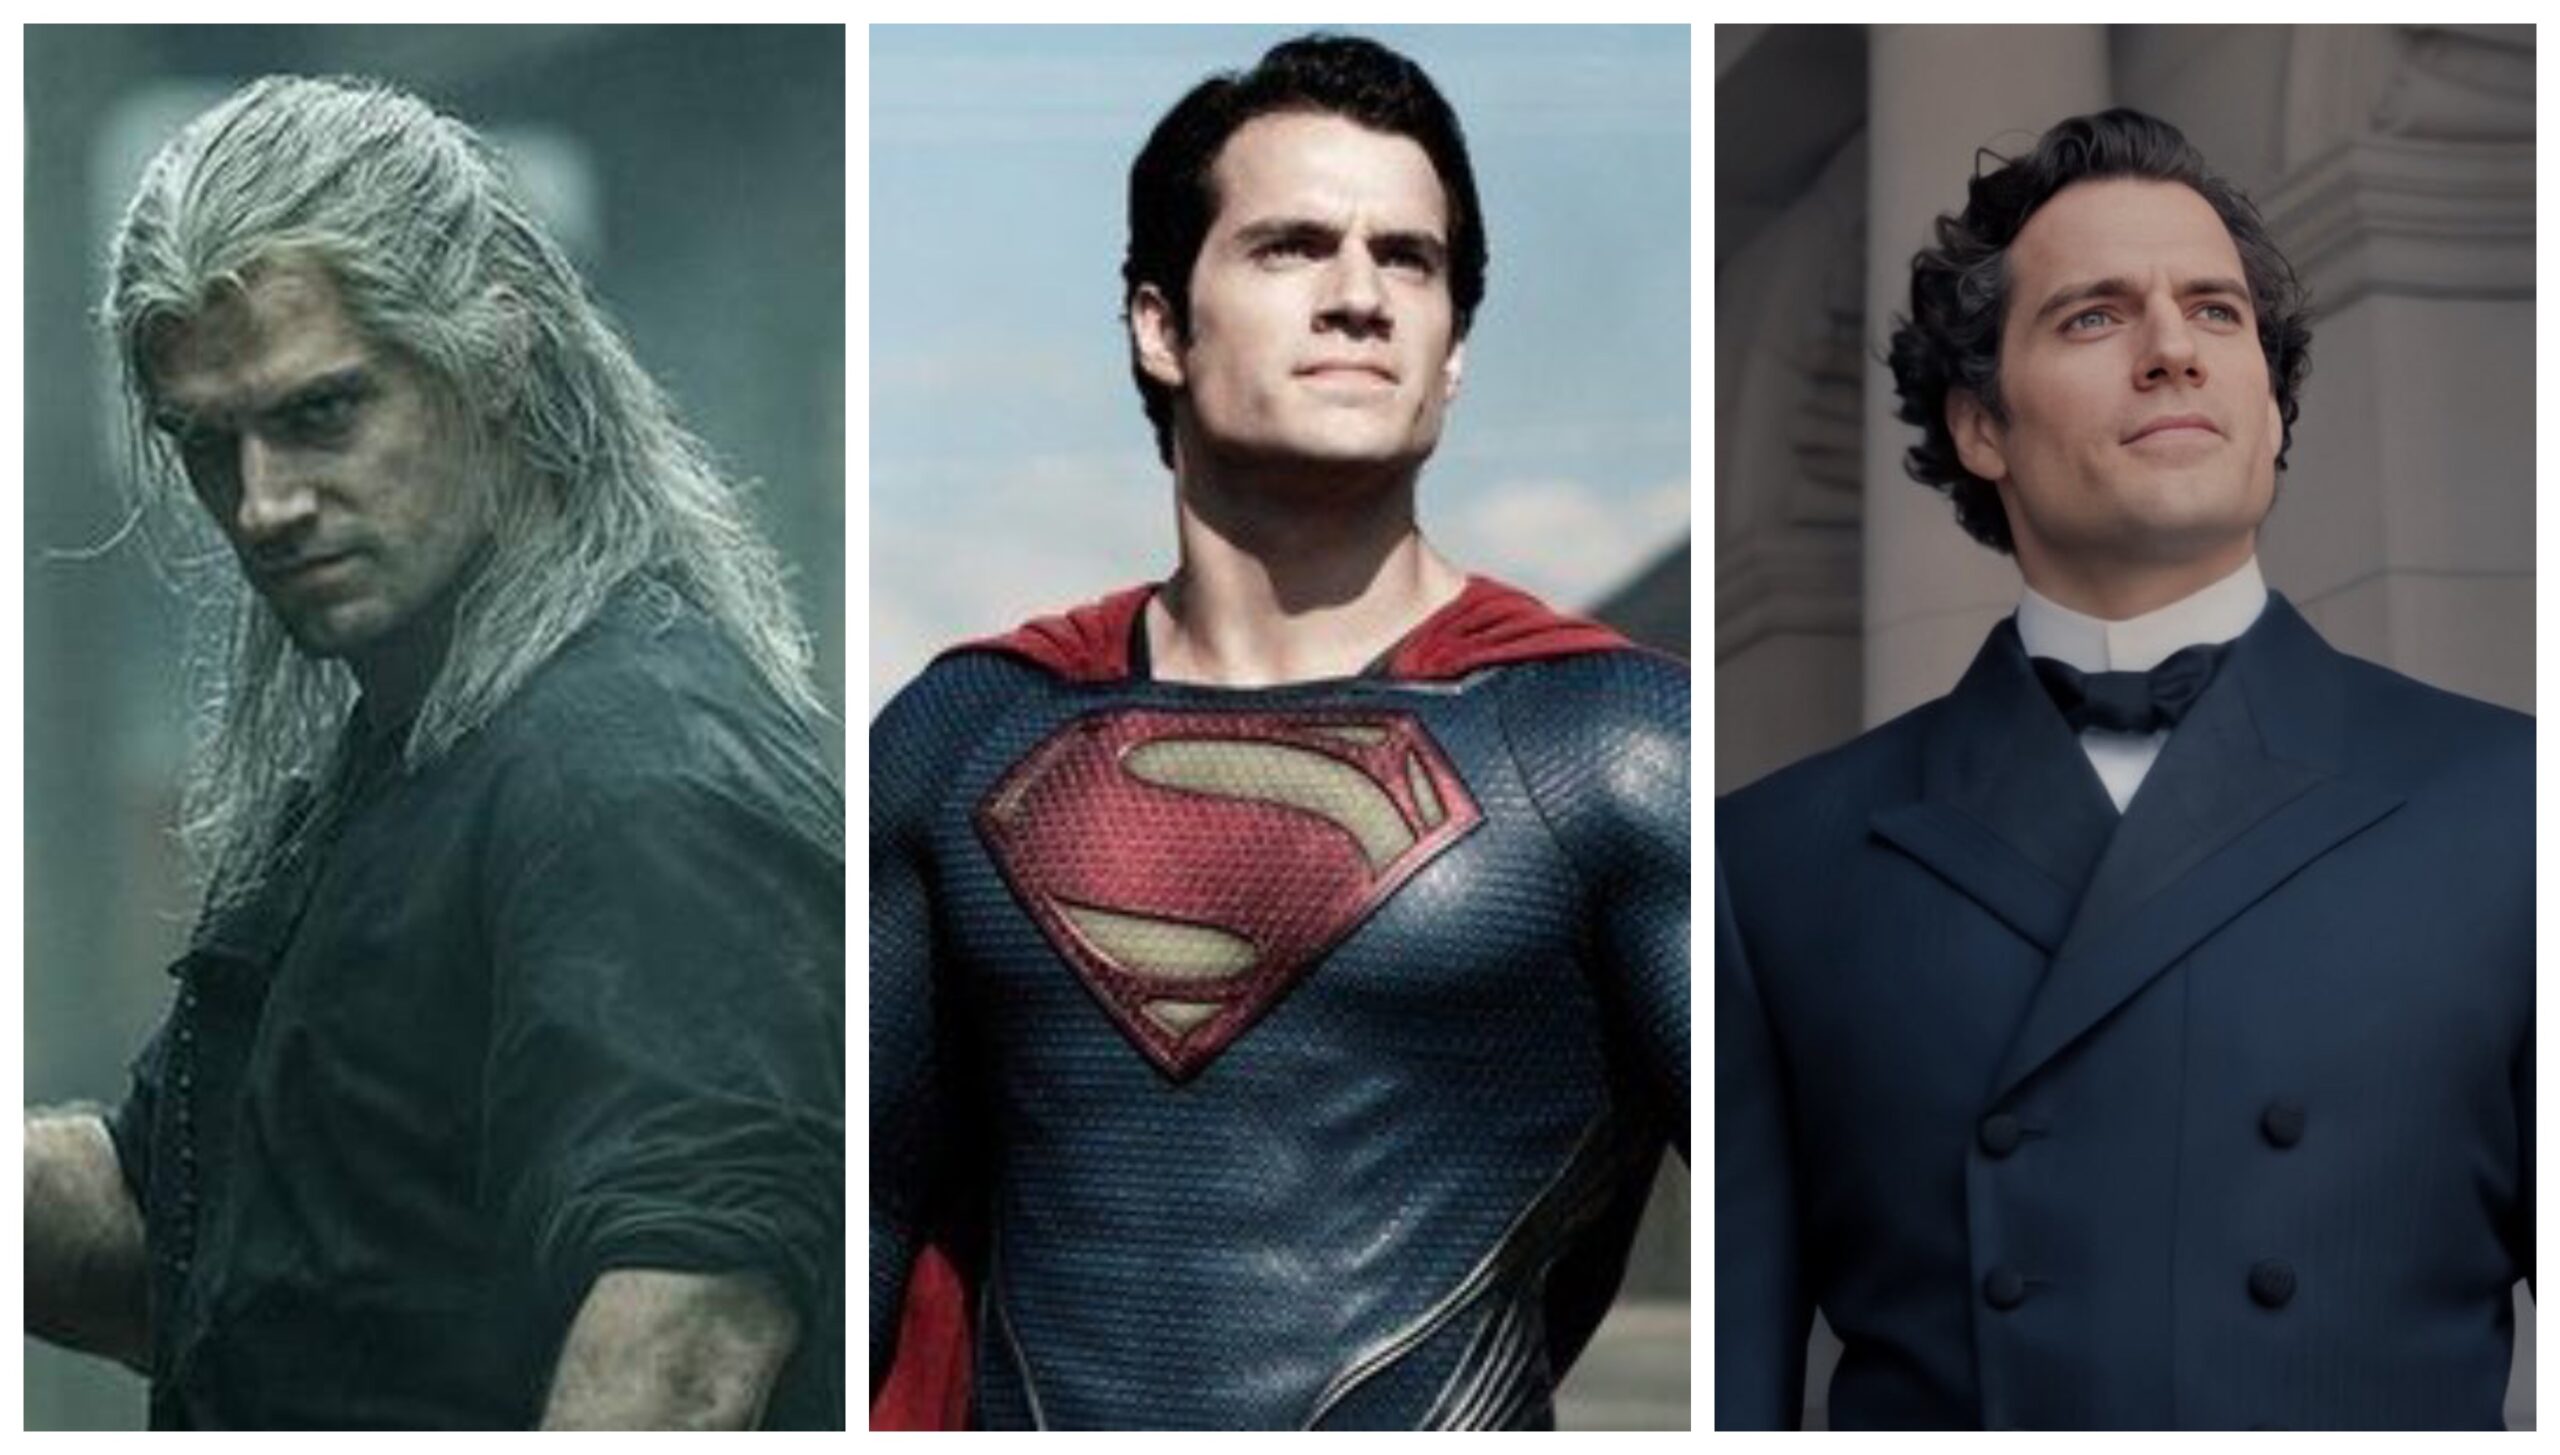 Marvel Studios is Interested in Casting Henry Cavill for Future Projects